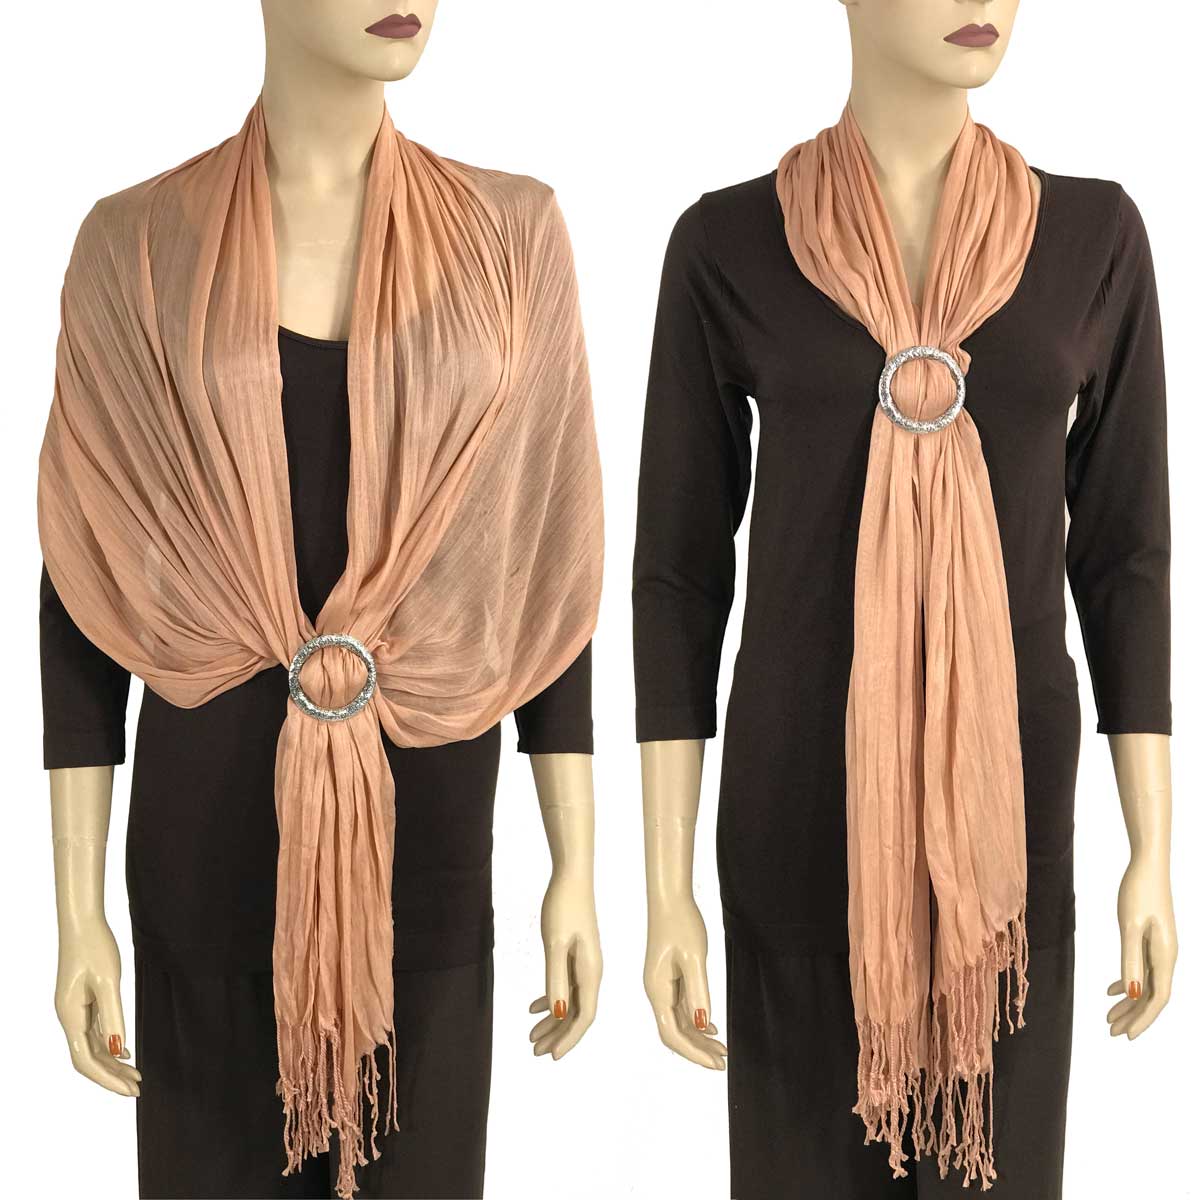 Shawl - Cotton/Silk #100 with Scarf Buckle Ring